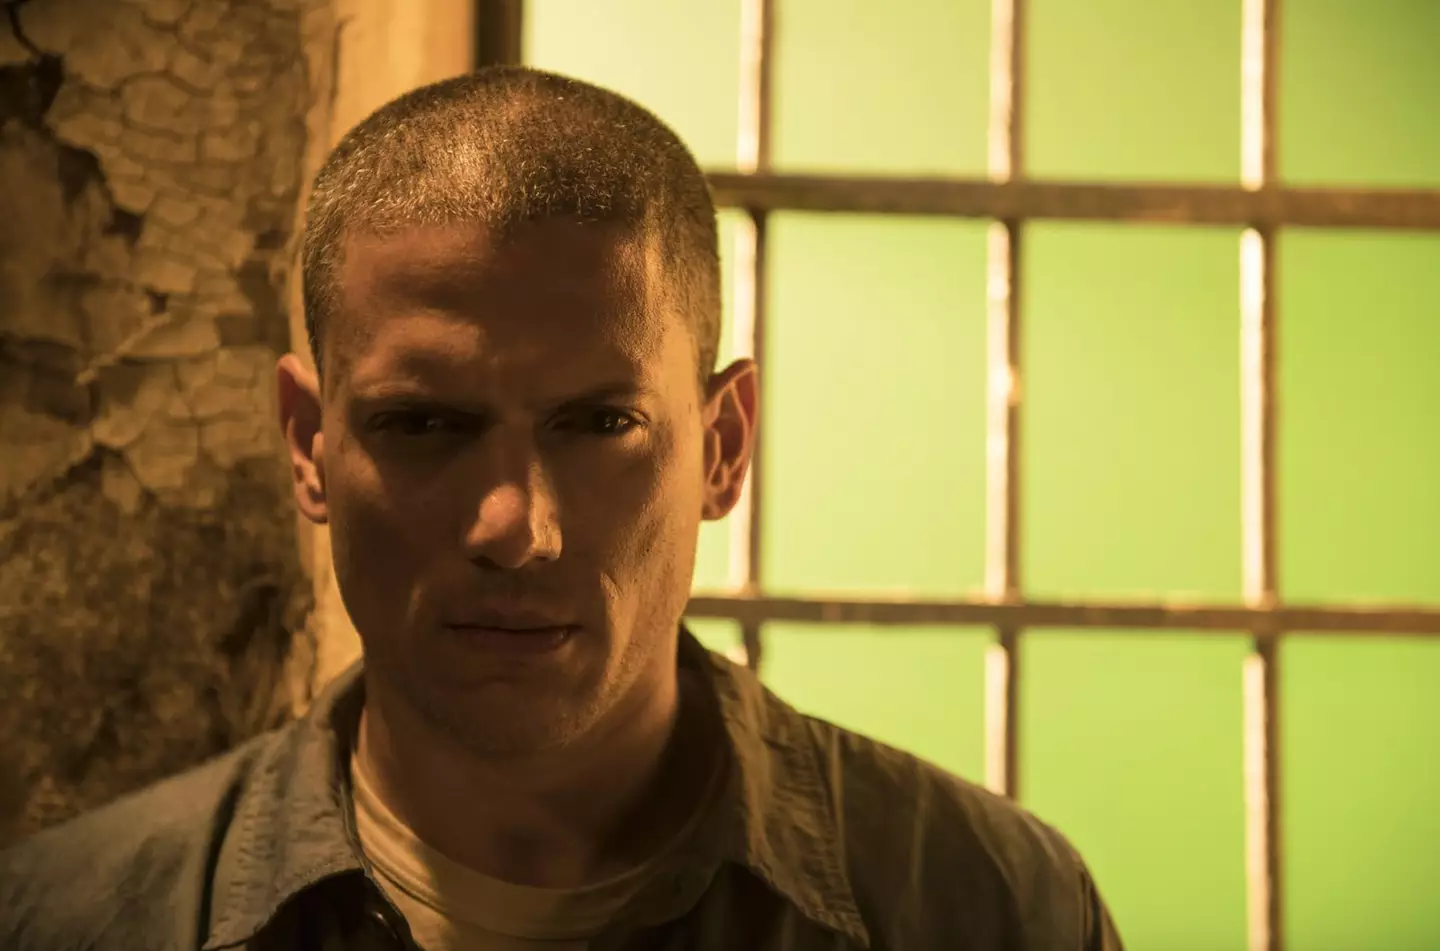 Wentworth Miller claimed he'd never return to the show. Credit:IMDB/Ed Aqaquel